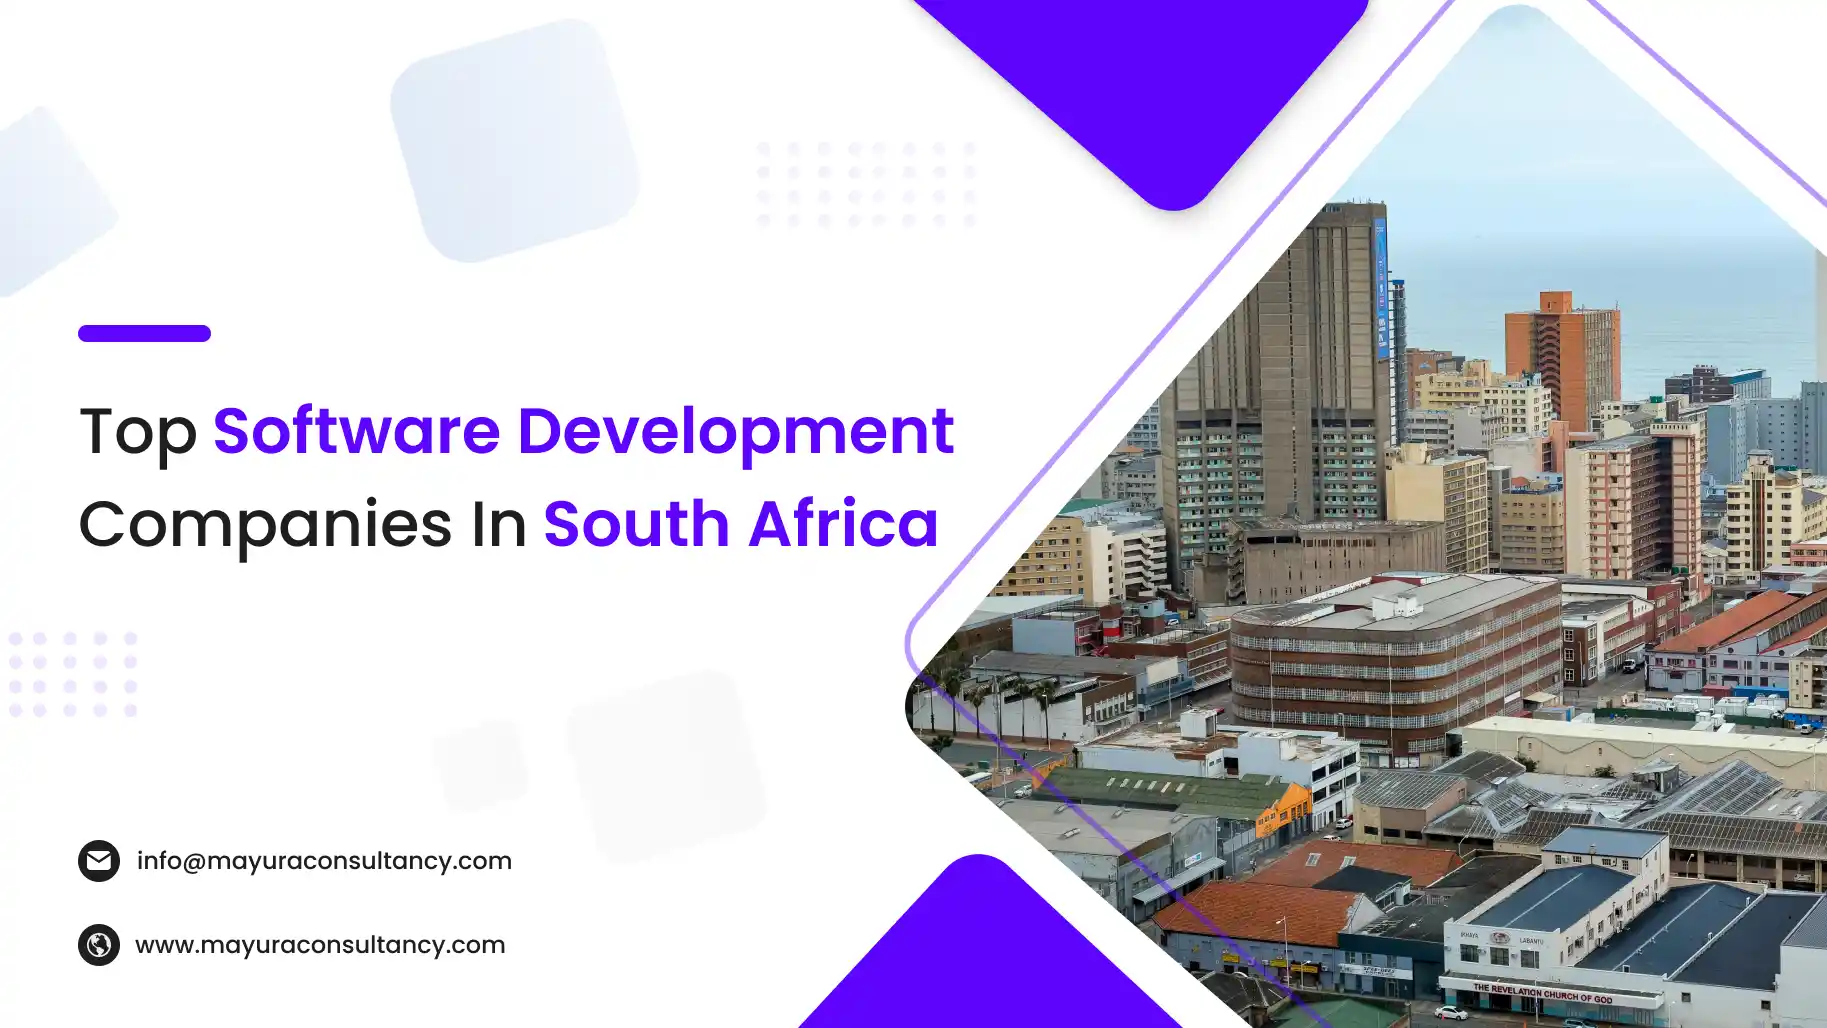 Top Software Development Companies in South Africa